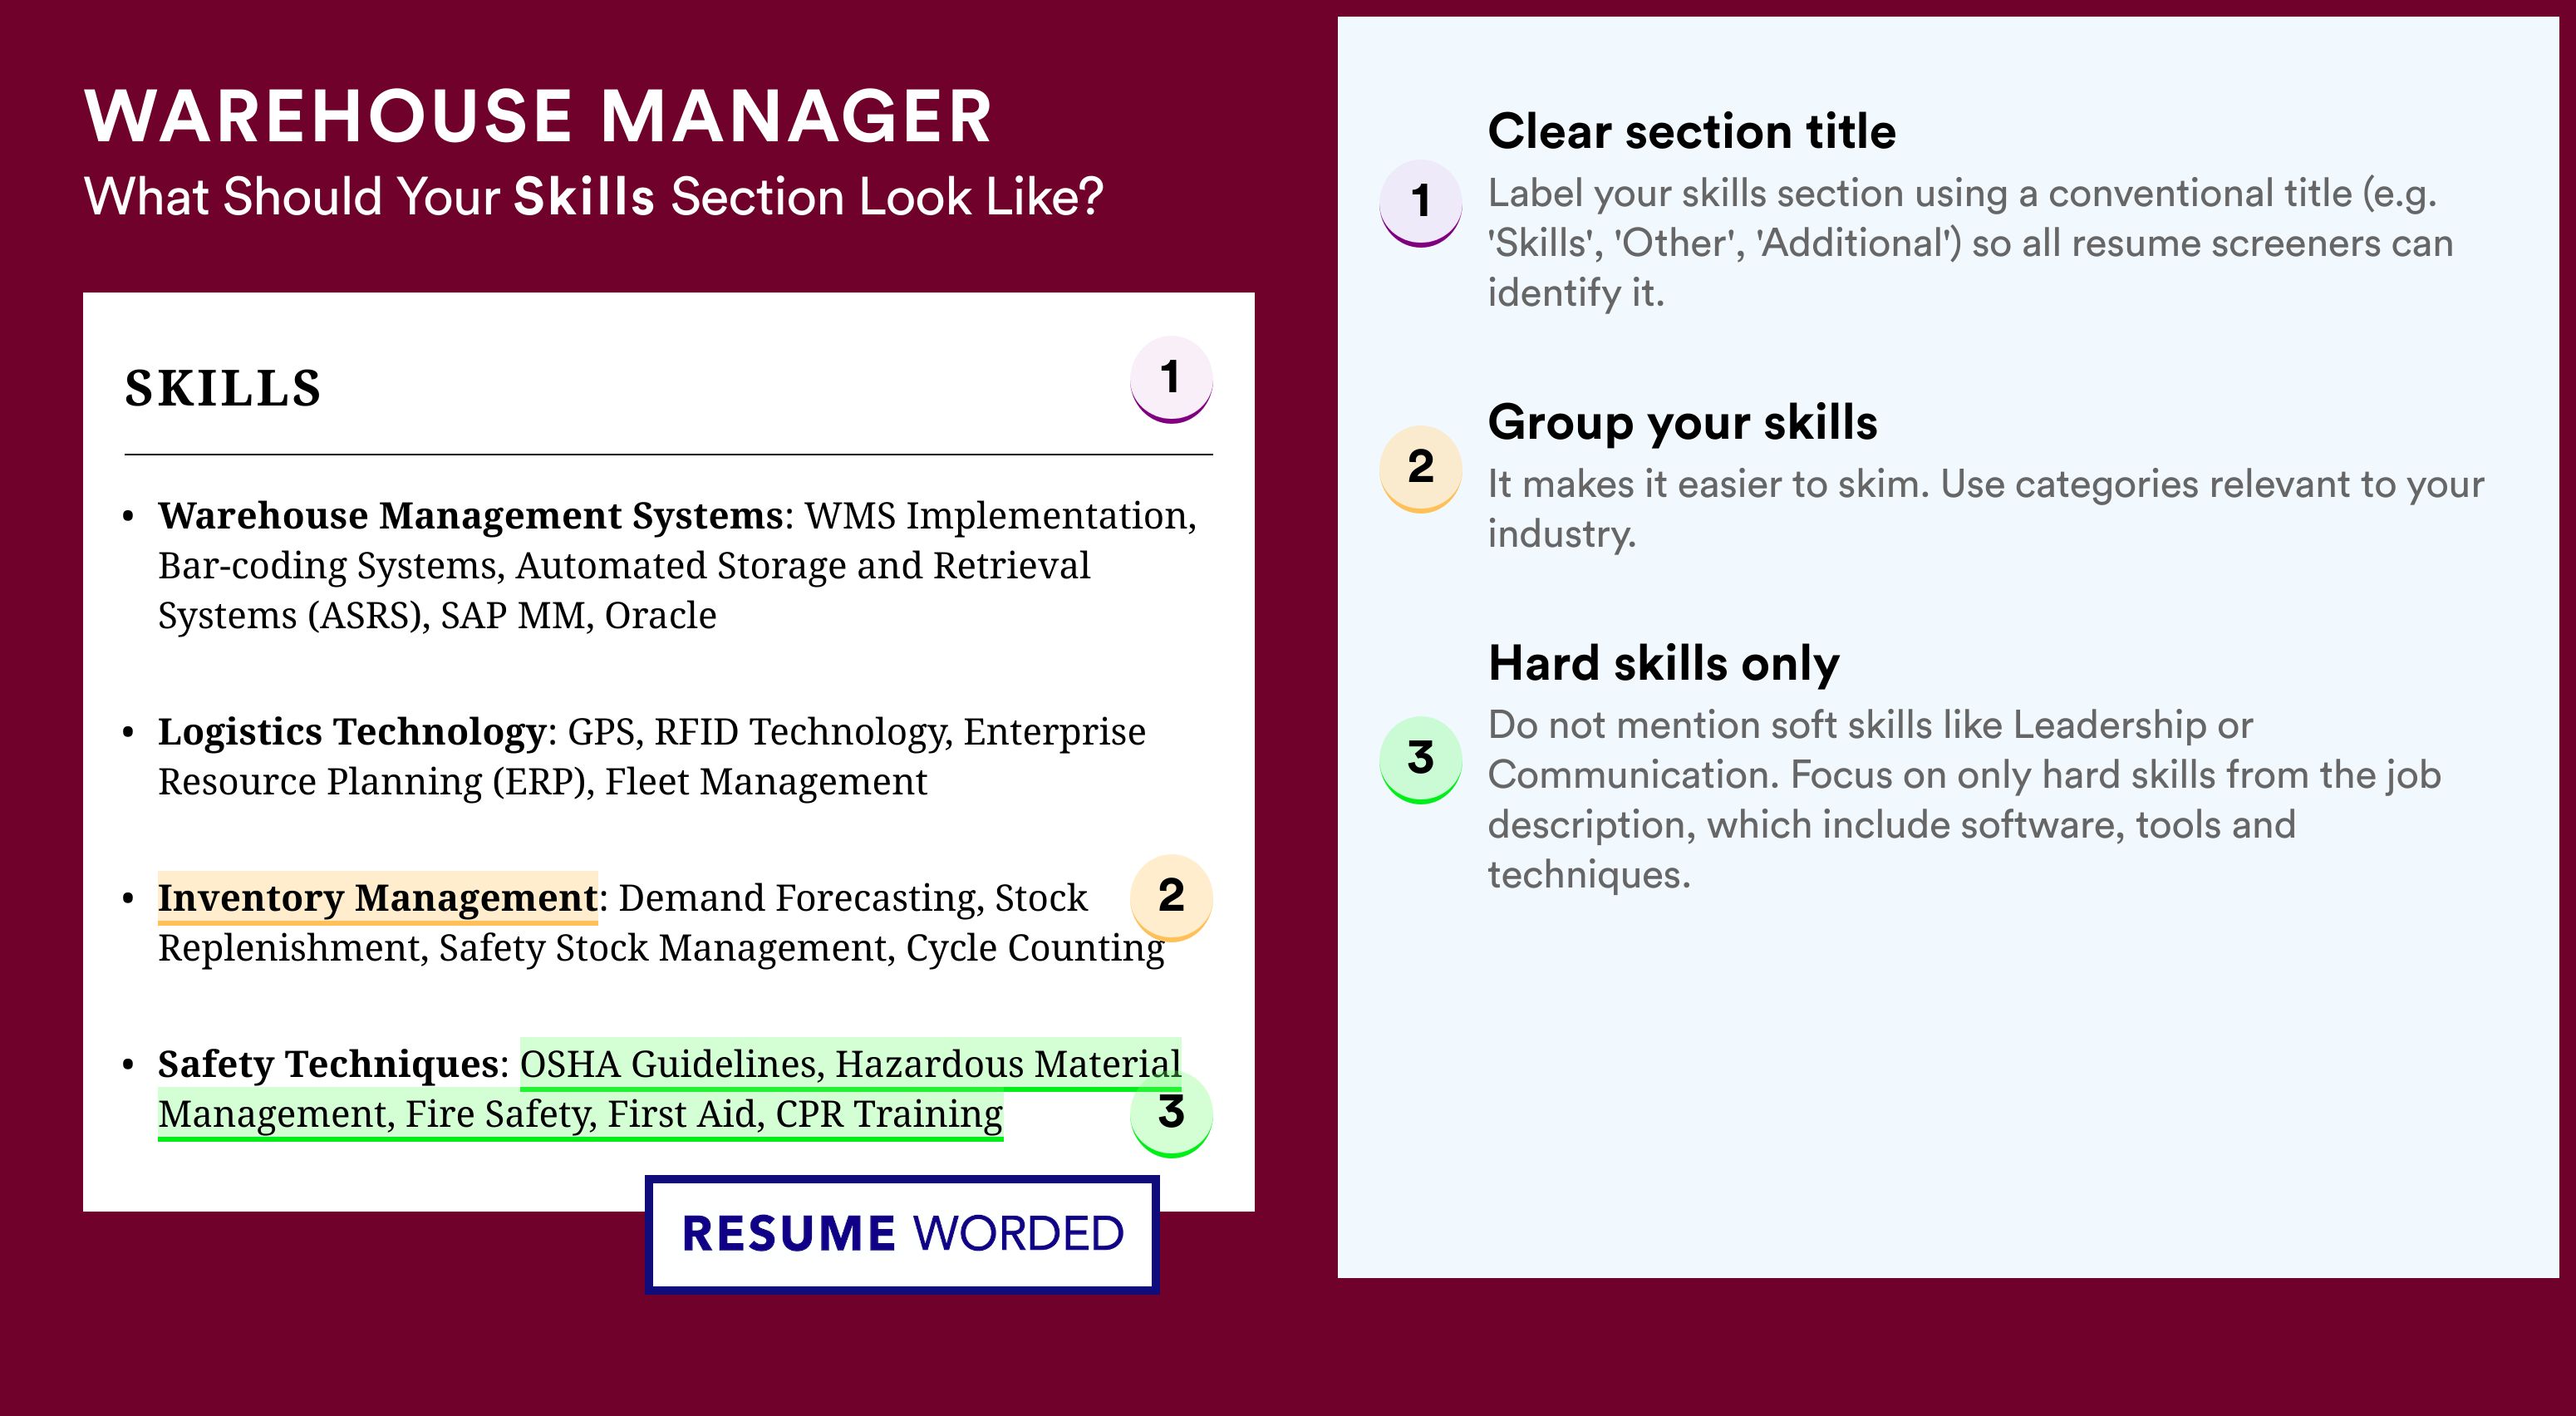 How To Write Your Skills Section - Warehouse Manager Roles